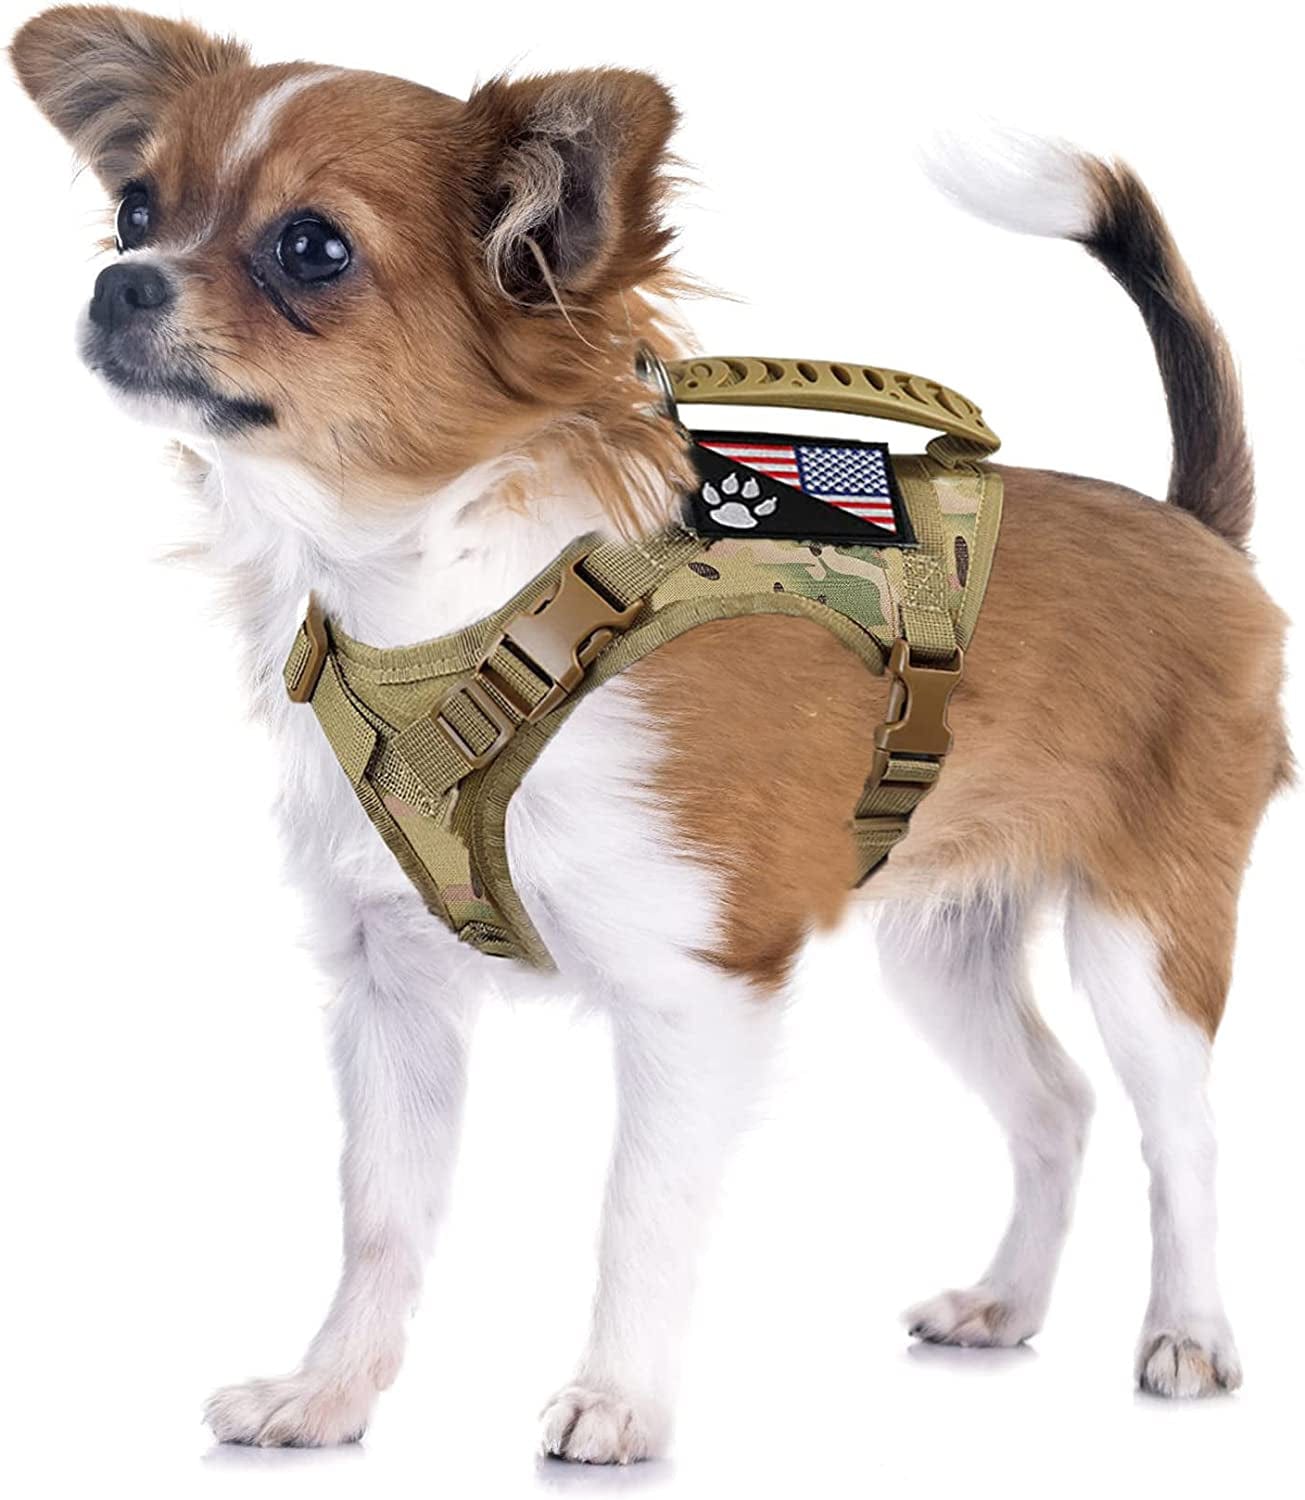 Hanshengday Tactical Service Dog Vest Harness Outdoor Training Handle Water-Resistant Comfortable Military Patrol K9 Dog Harness with Handle